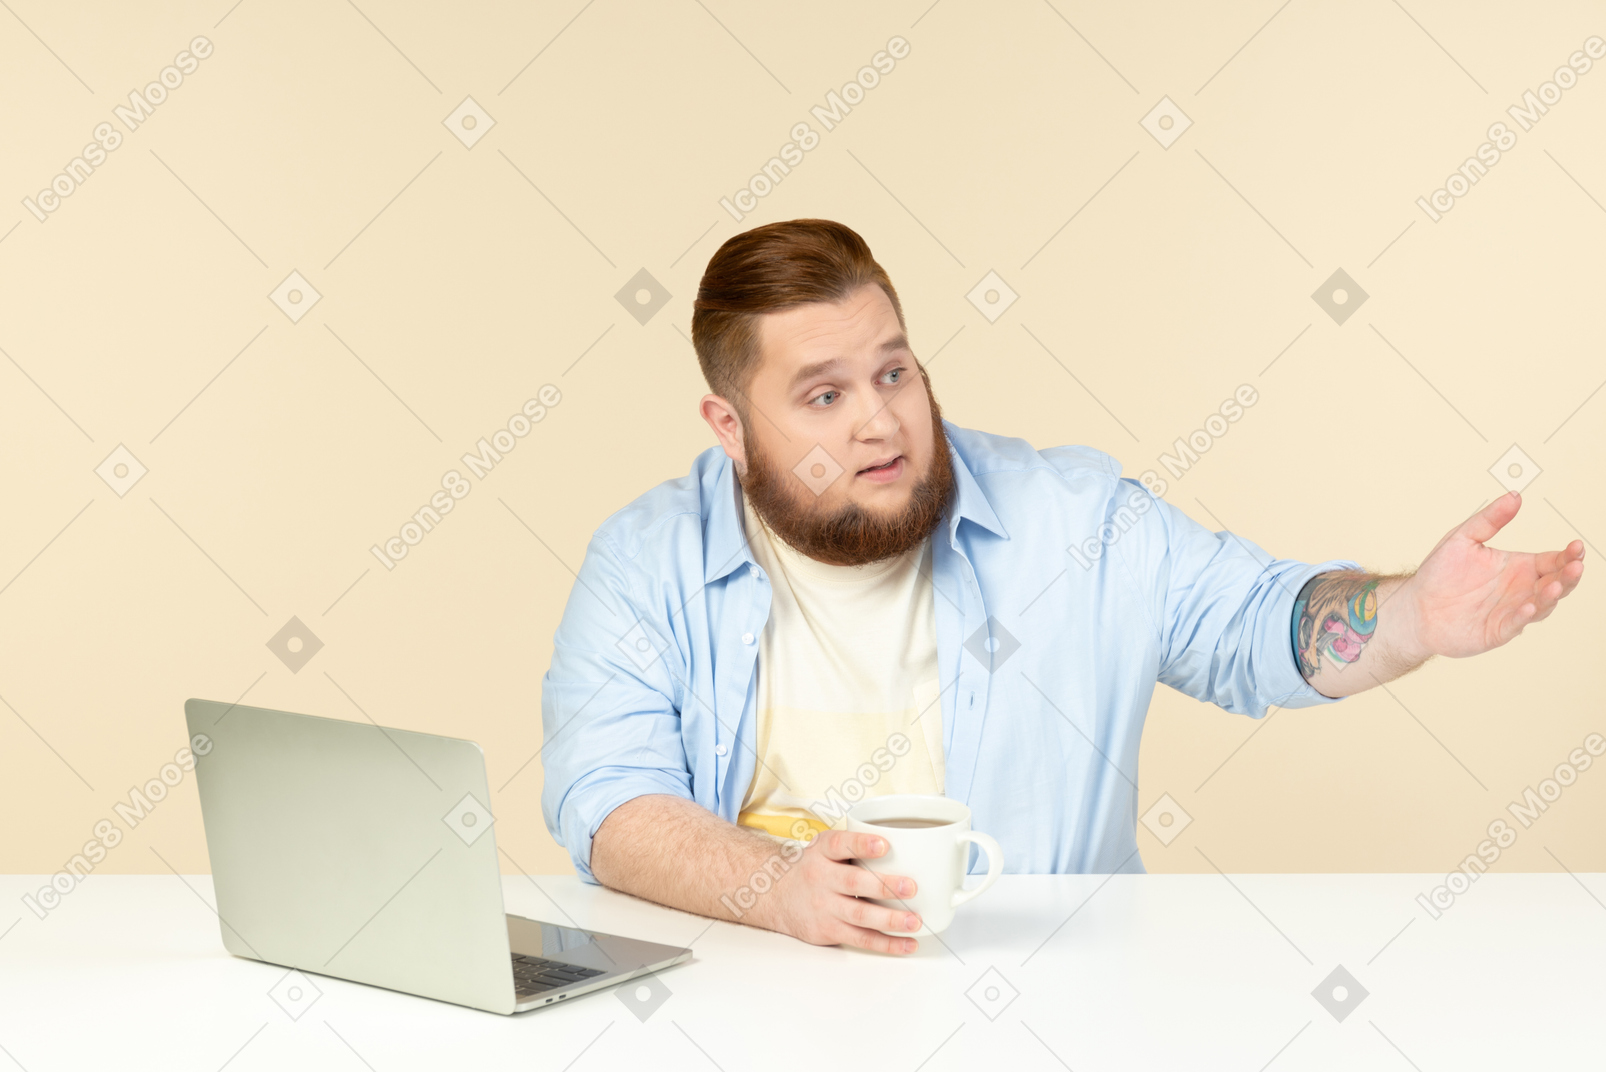 Young overweight man sitting in front of laptop and having tea